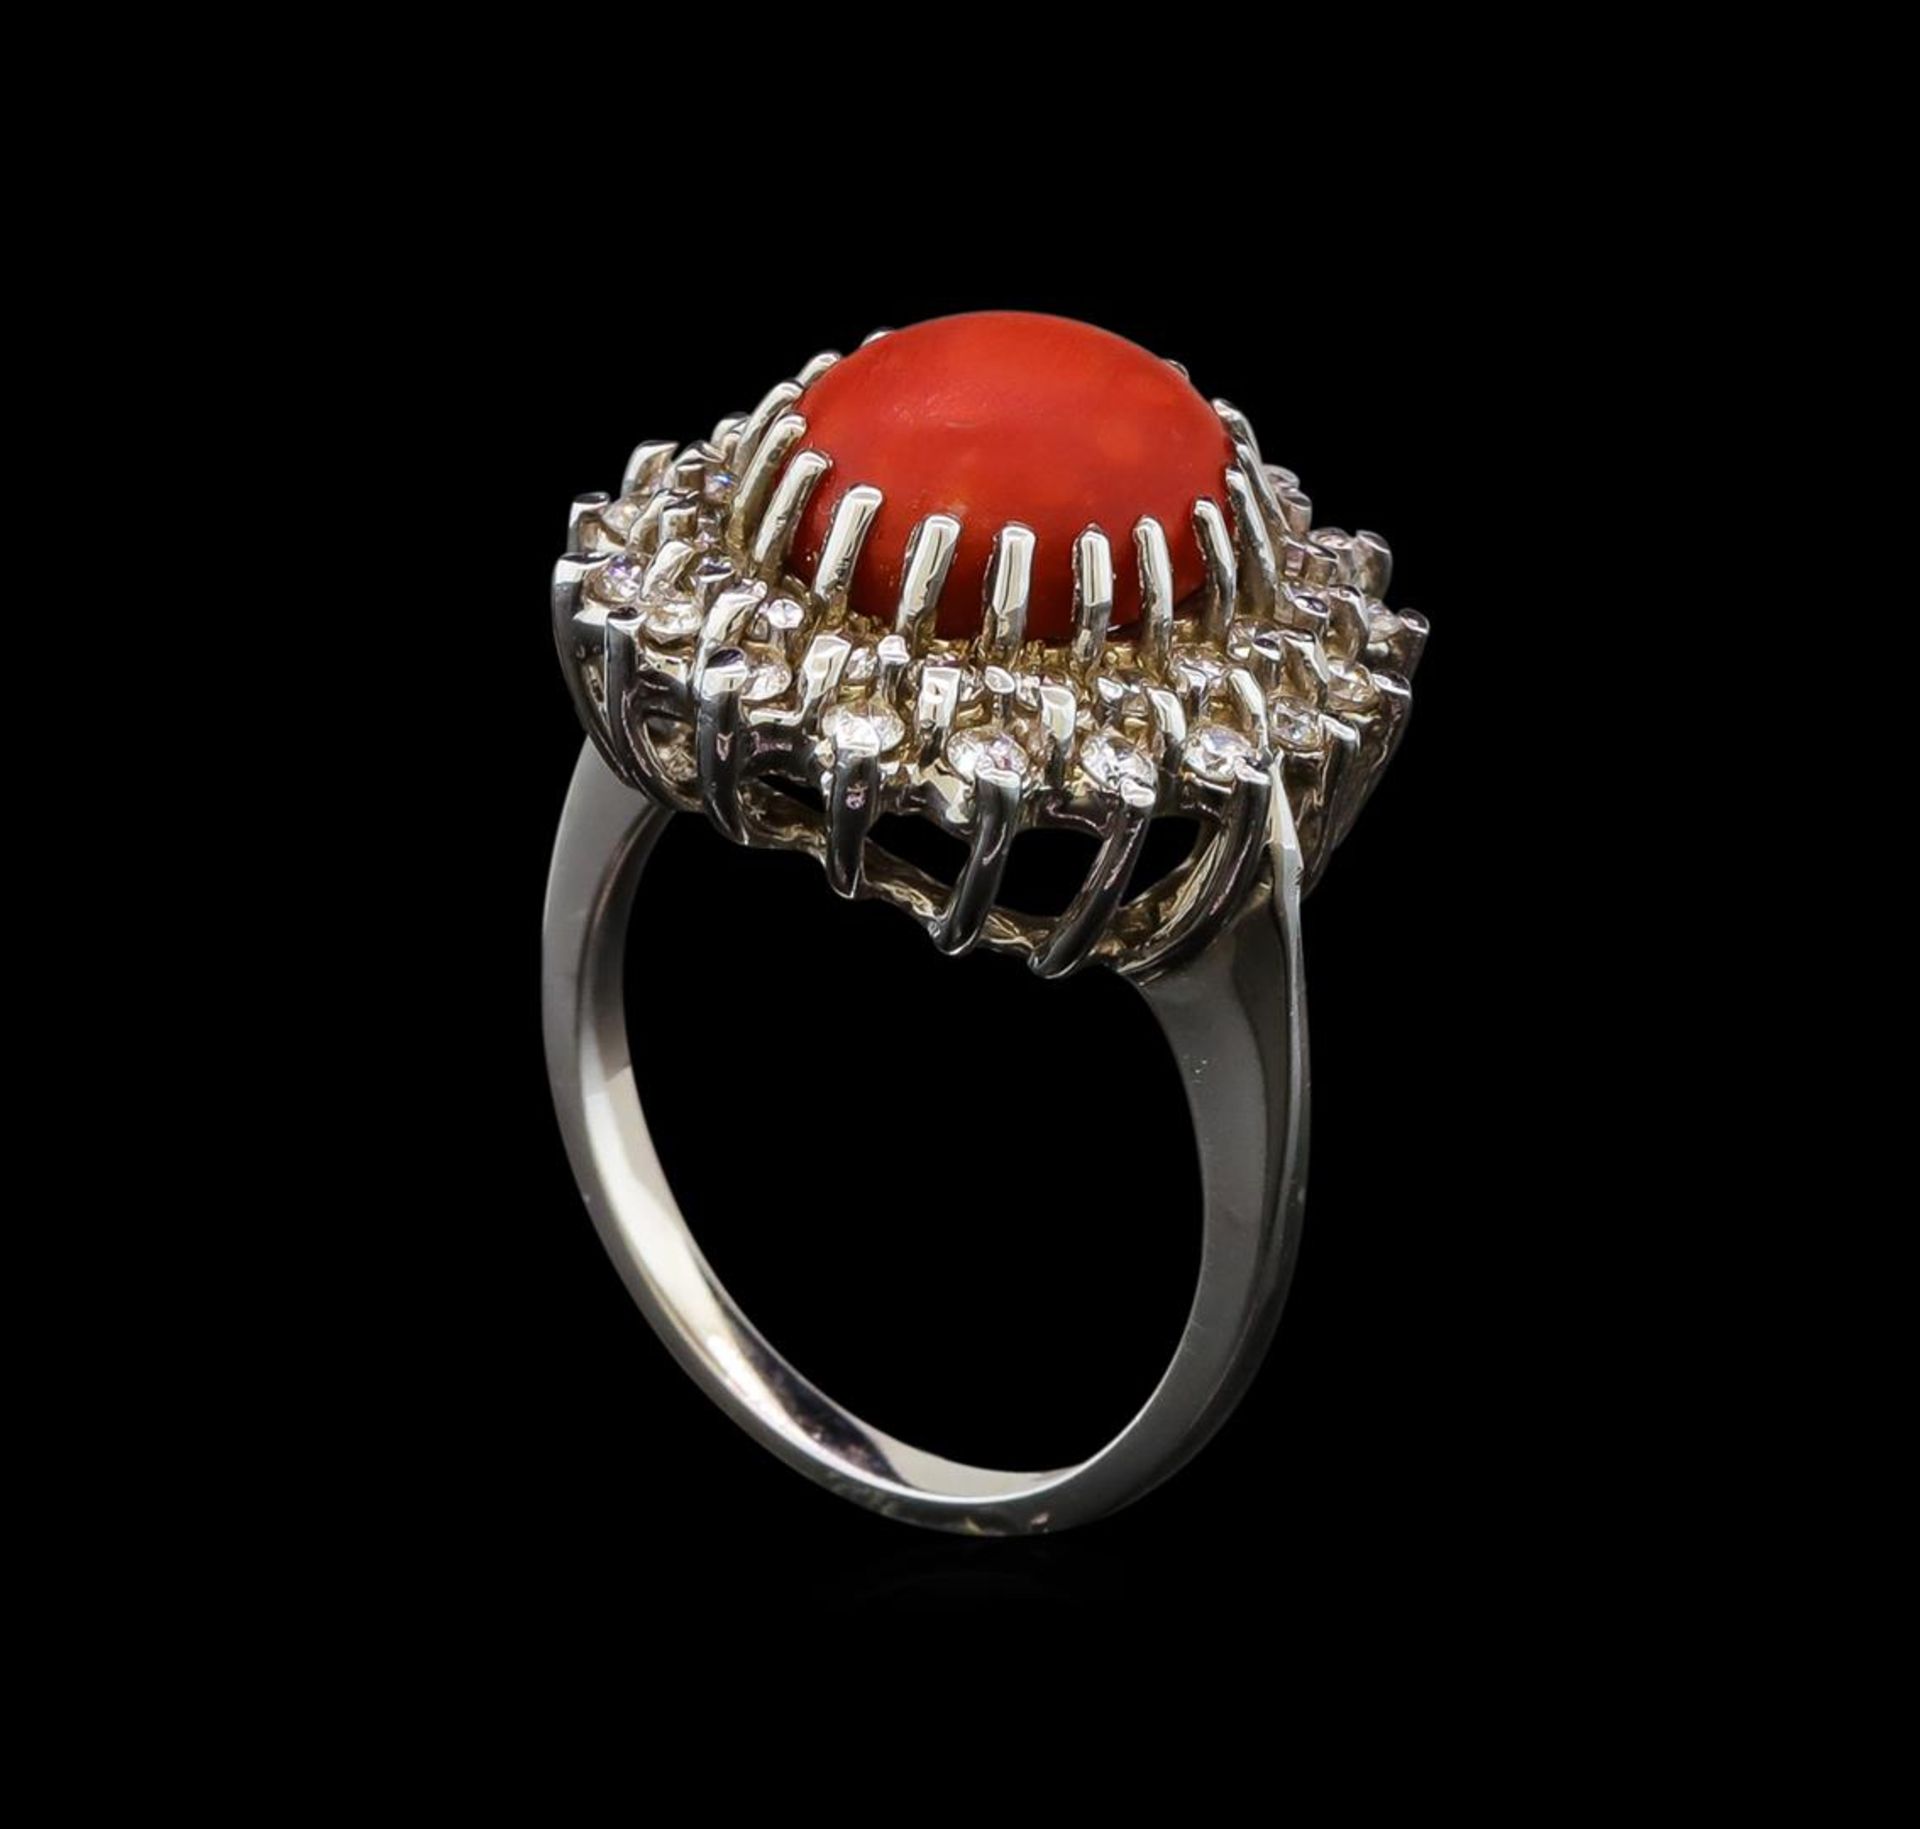 14KT White Gold 3.85 ctw Agate and Diamond Ring - Image 4 of 5